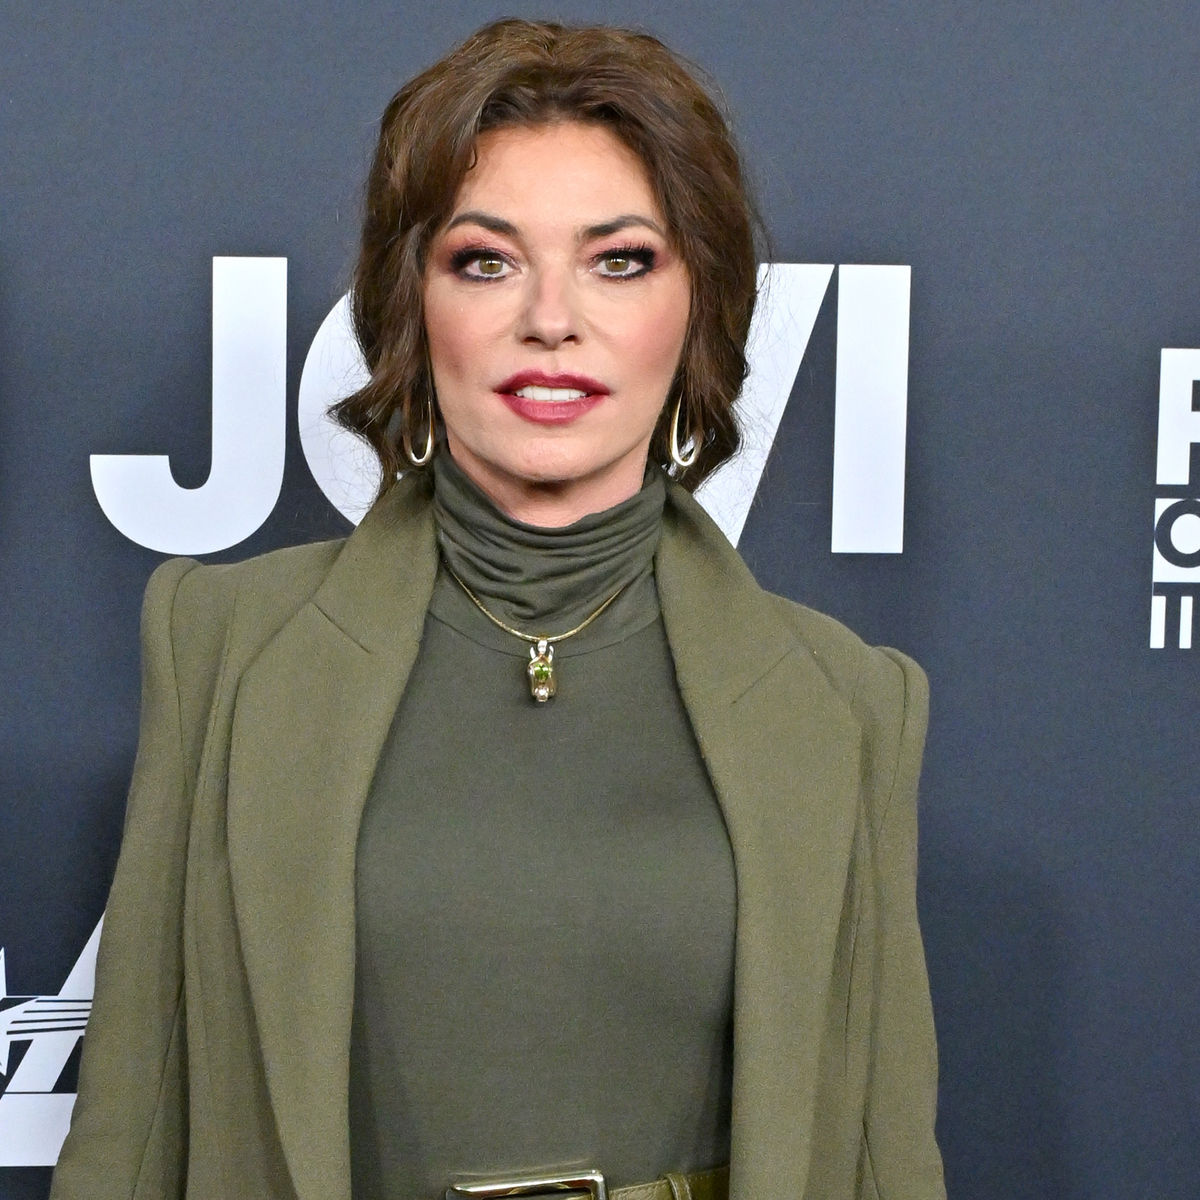 Shania Twain Looks Unrecognizable in Vibrant Pink…